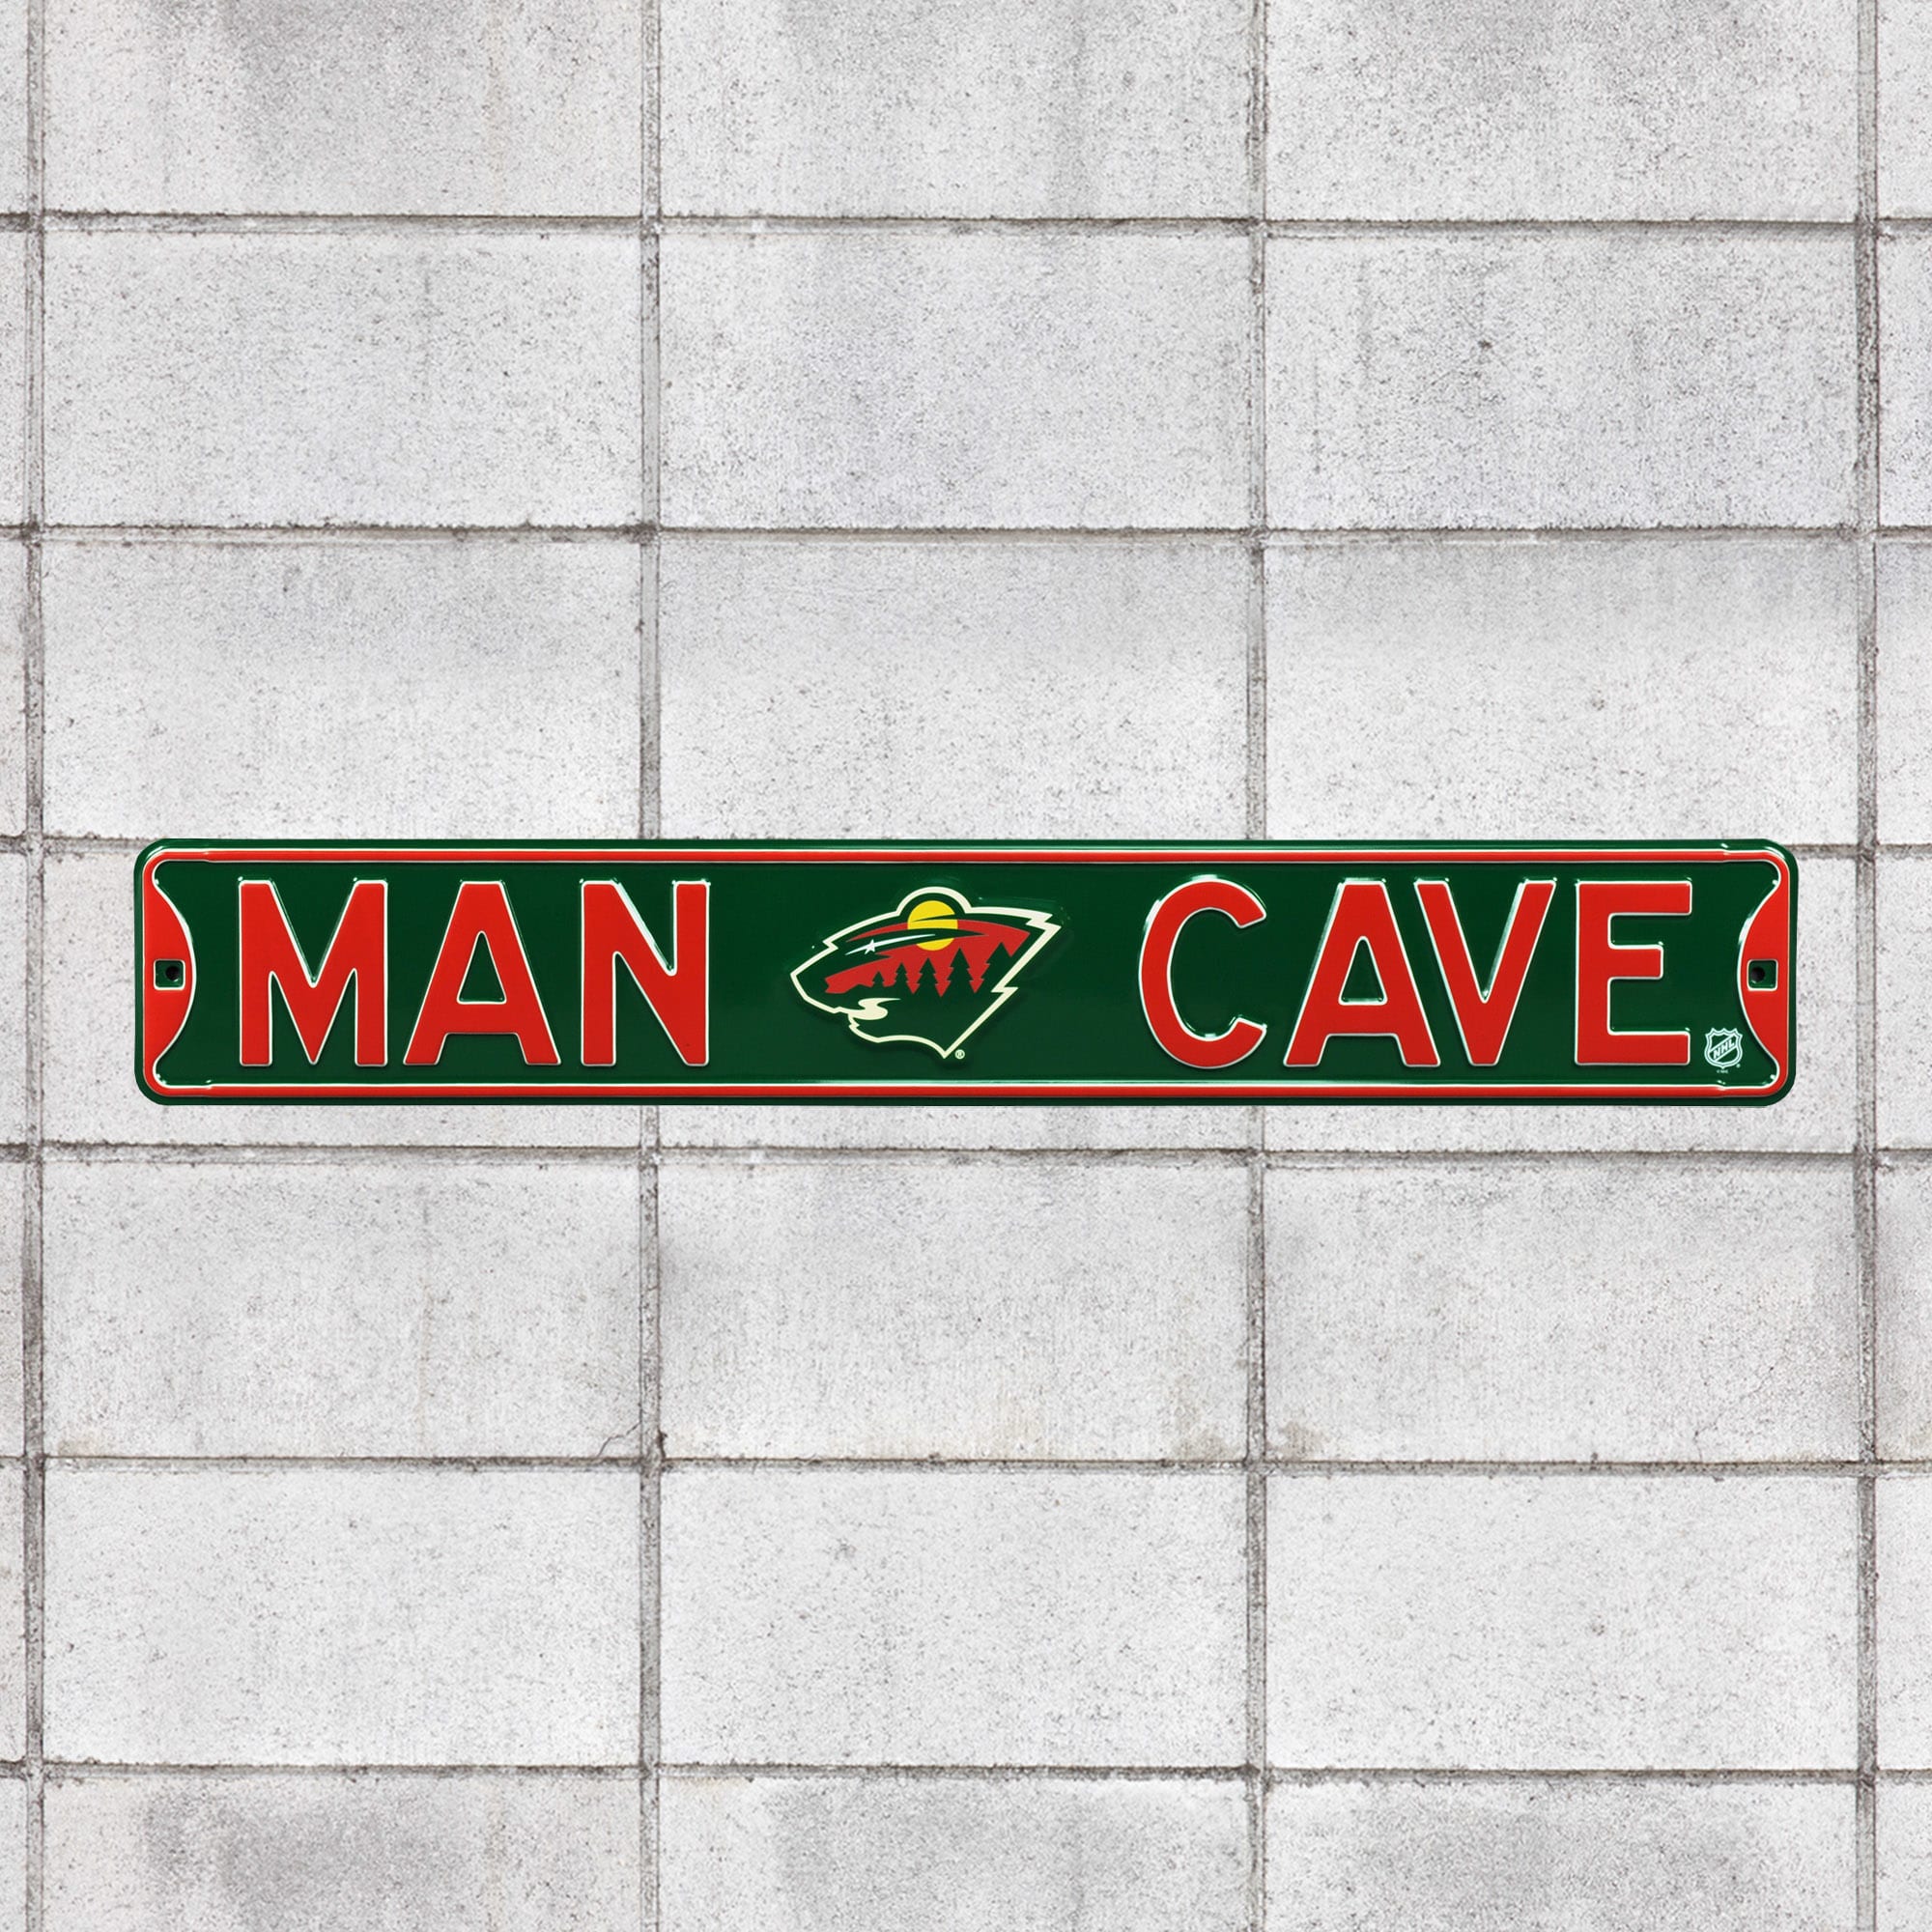 Minnesota Wild: Man Cave - Officially Licensed NHL Metal Street Sign 36.0"W x 6.0"H by Fathead | 100% Steel